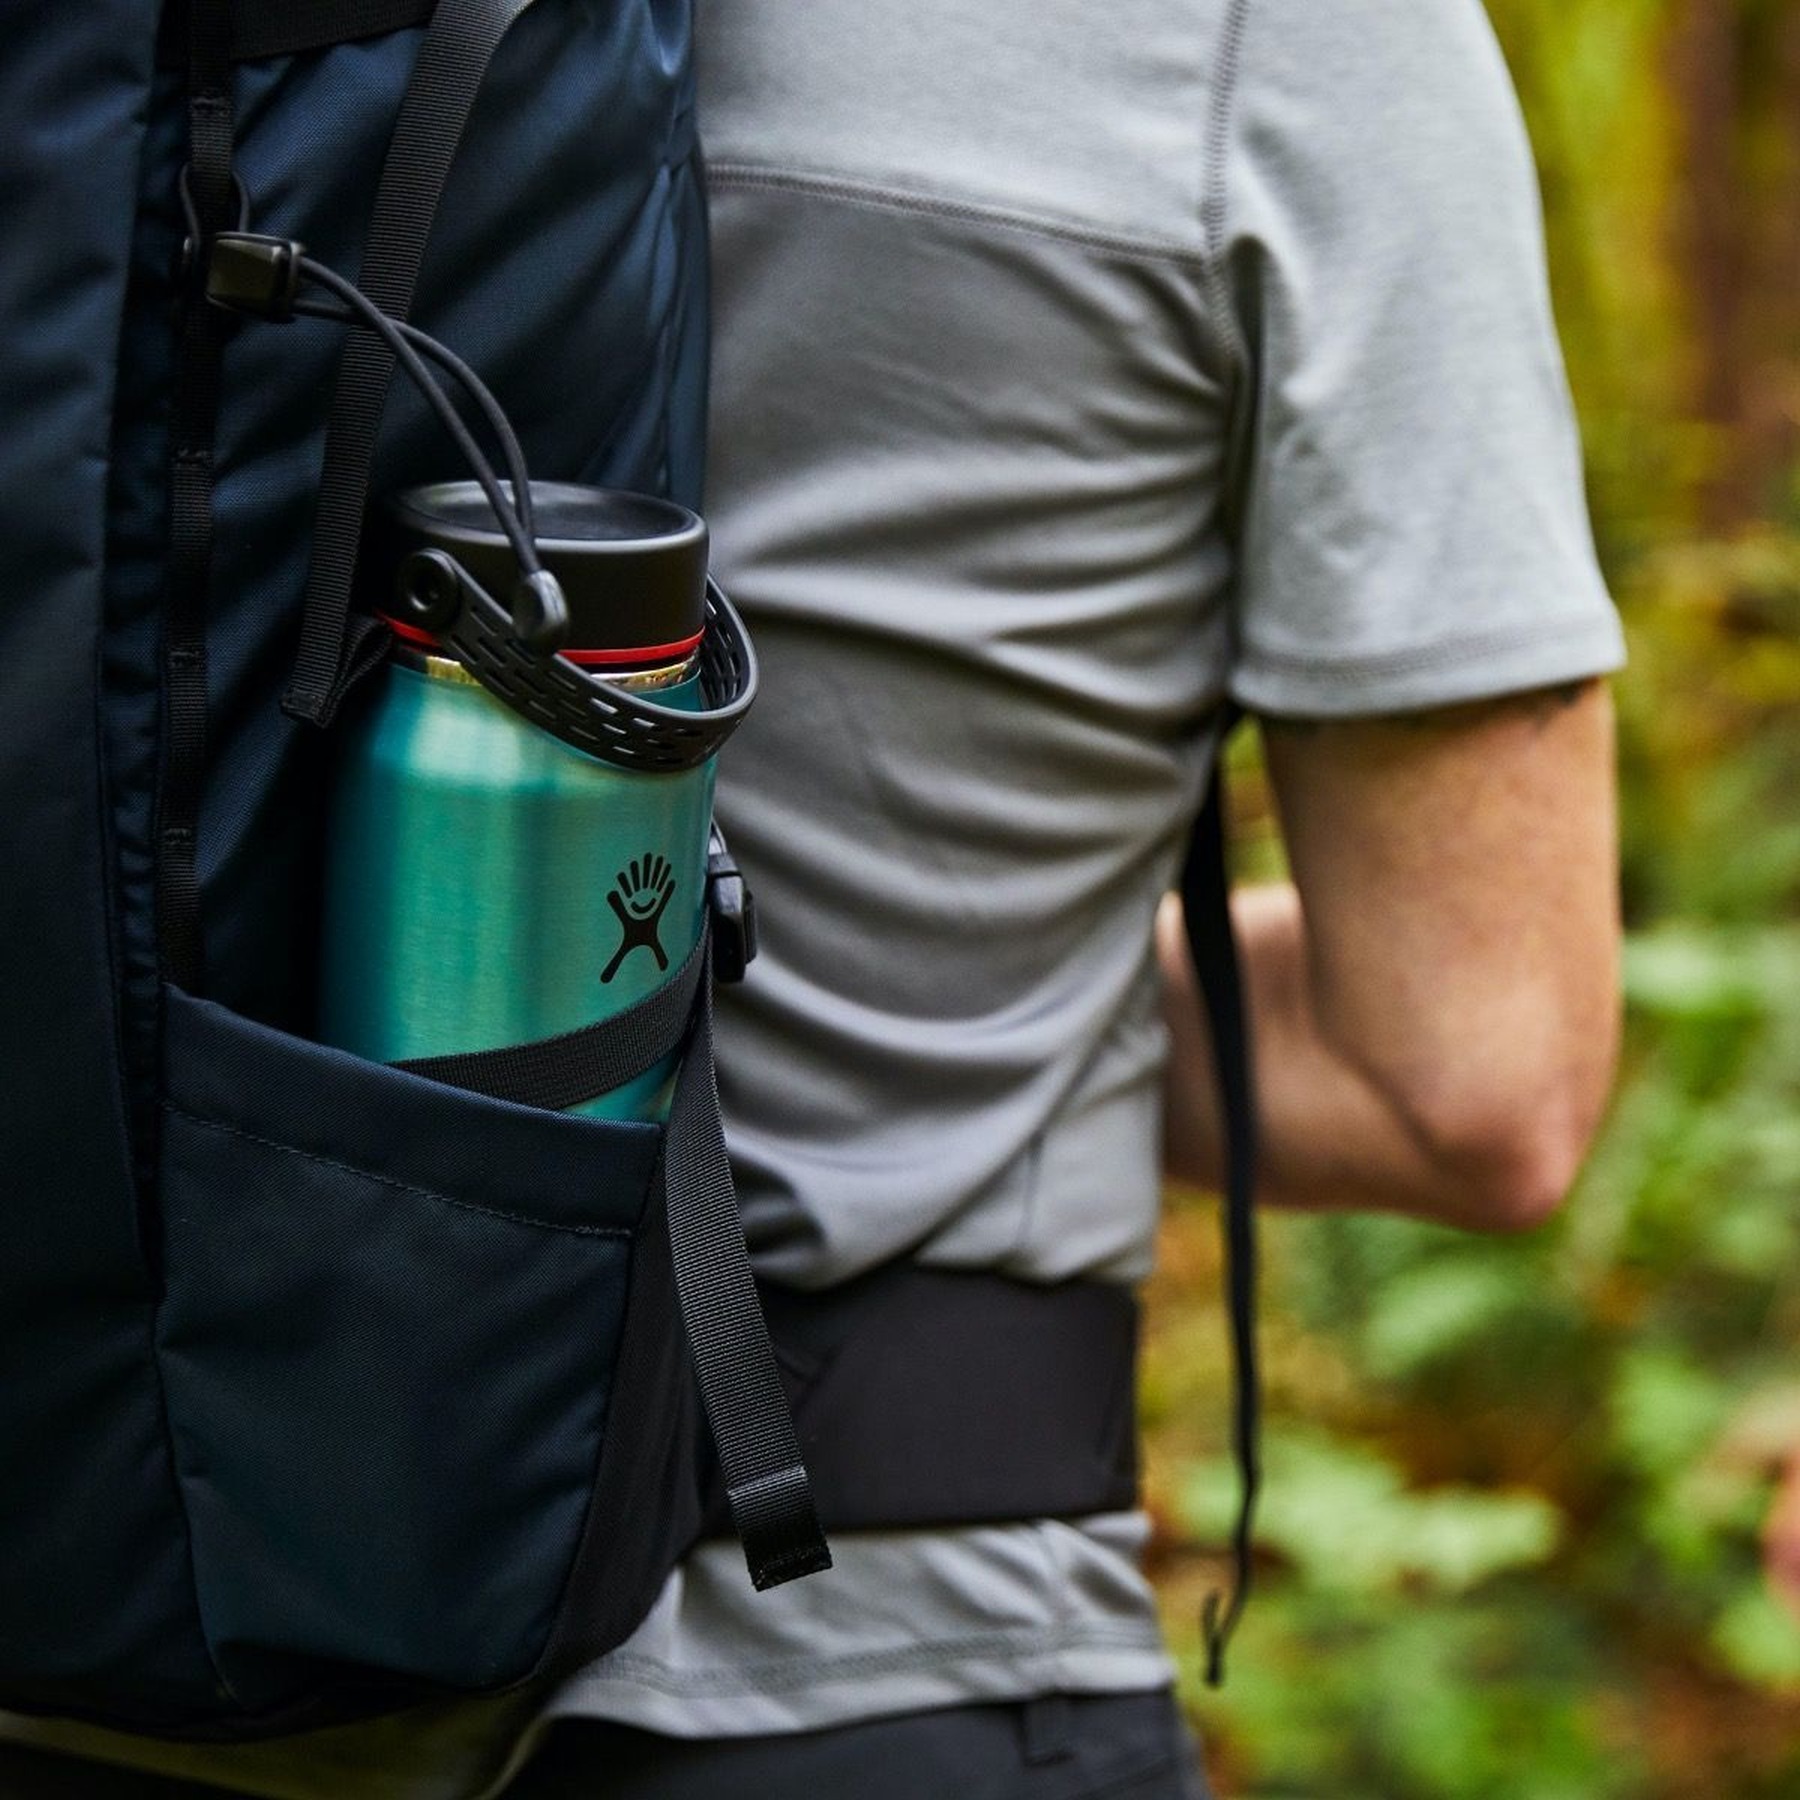 Hydro Flask 40 oz. Lightweight Wide Mouth Trail Series